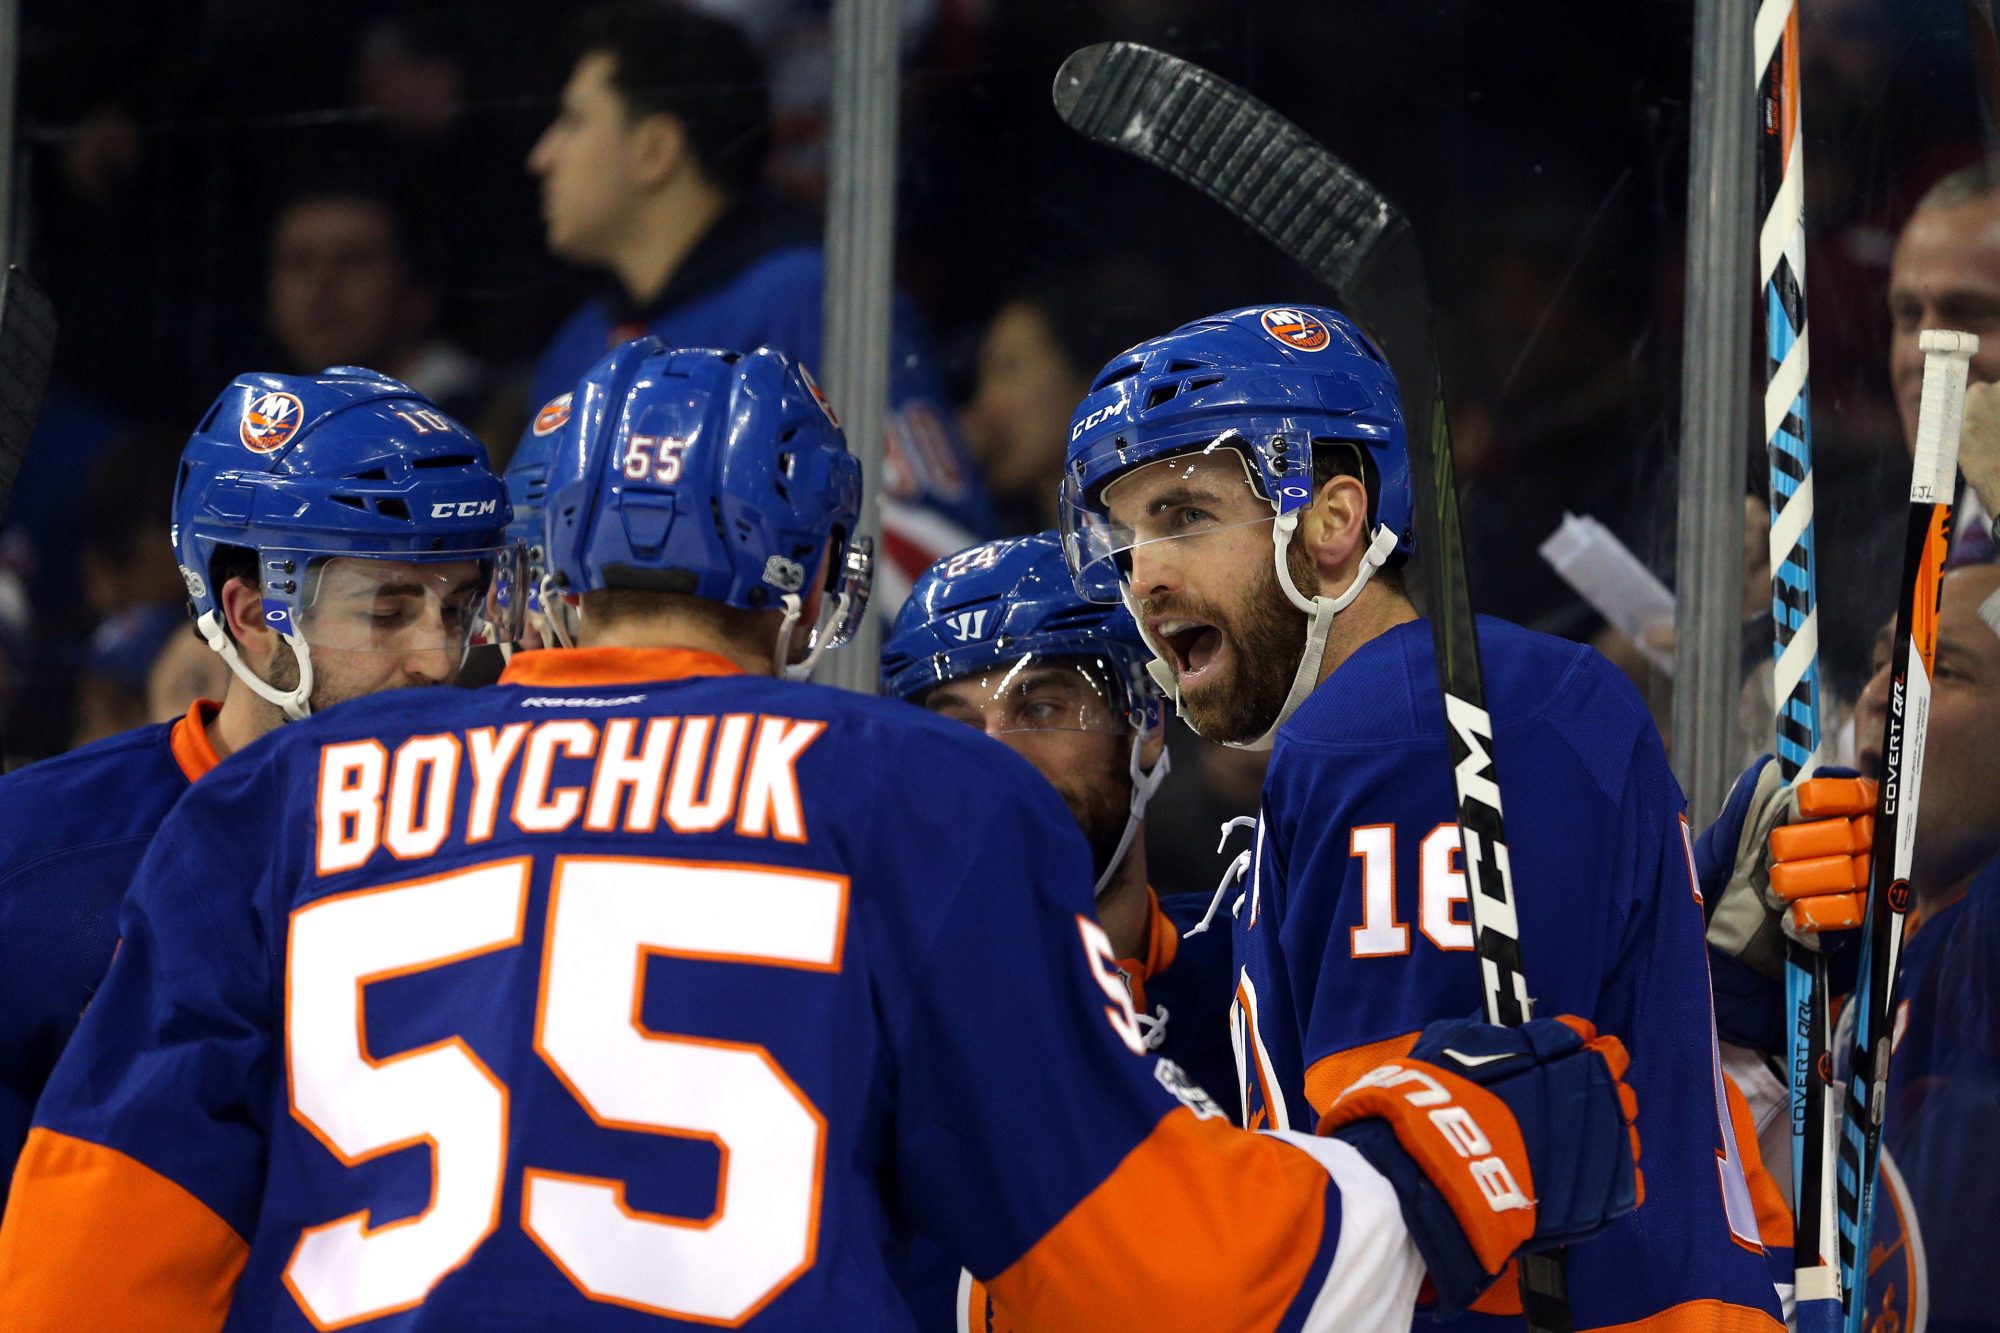 Andrew Ladd, New York Islanders take care of Rangers at home, 4-2 (Highlights) 